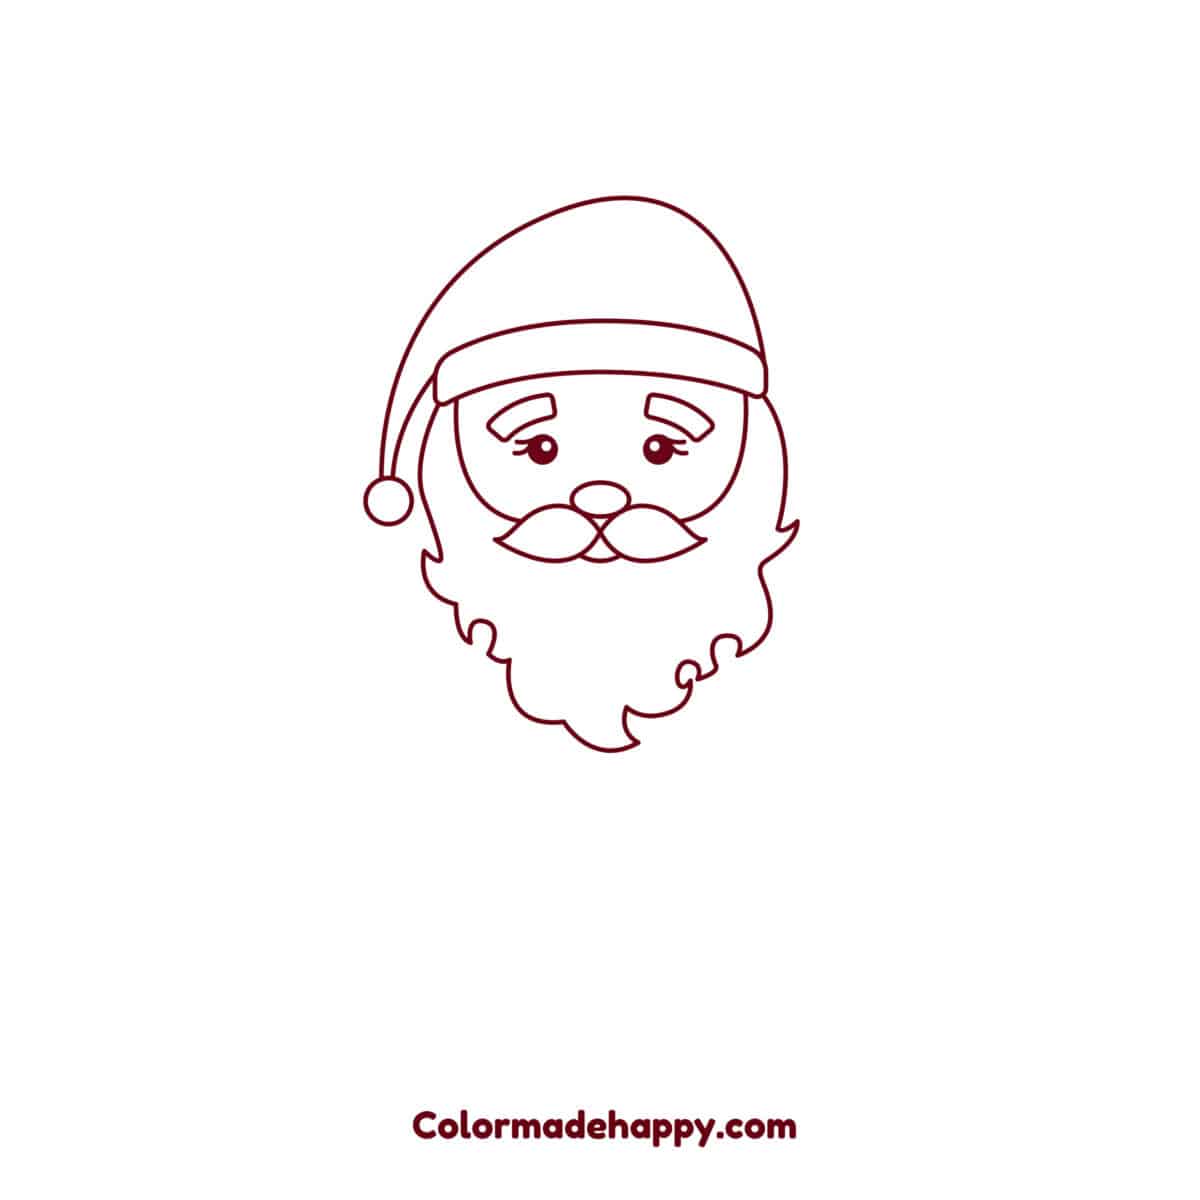 Santa drawing with a flowing beard